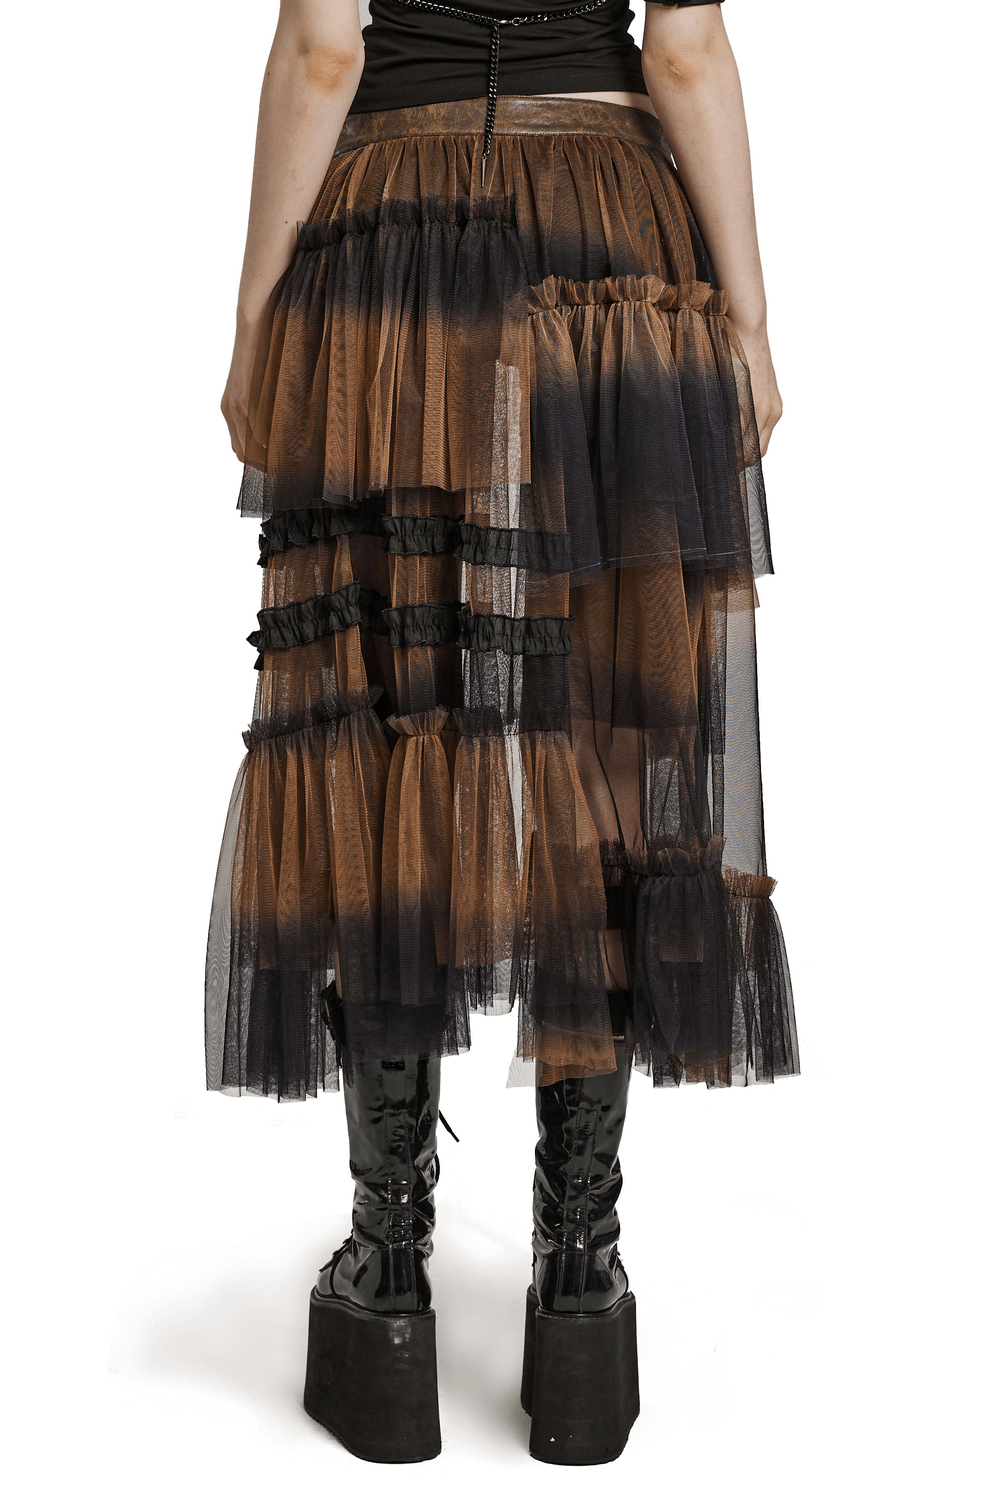 Dramatic Long Layered Mesh Half Skirt with Belt for Women